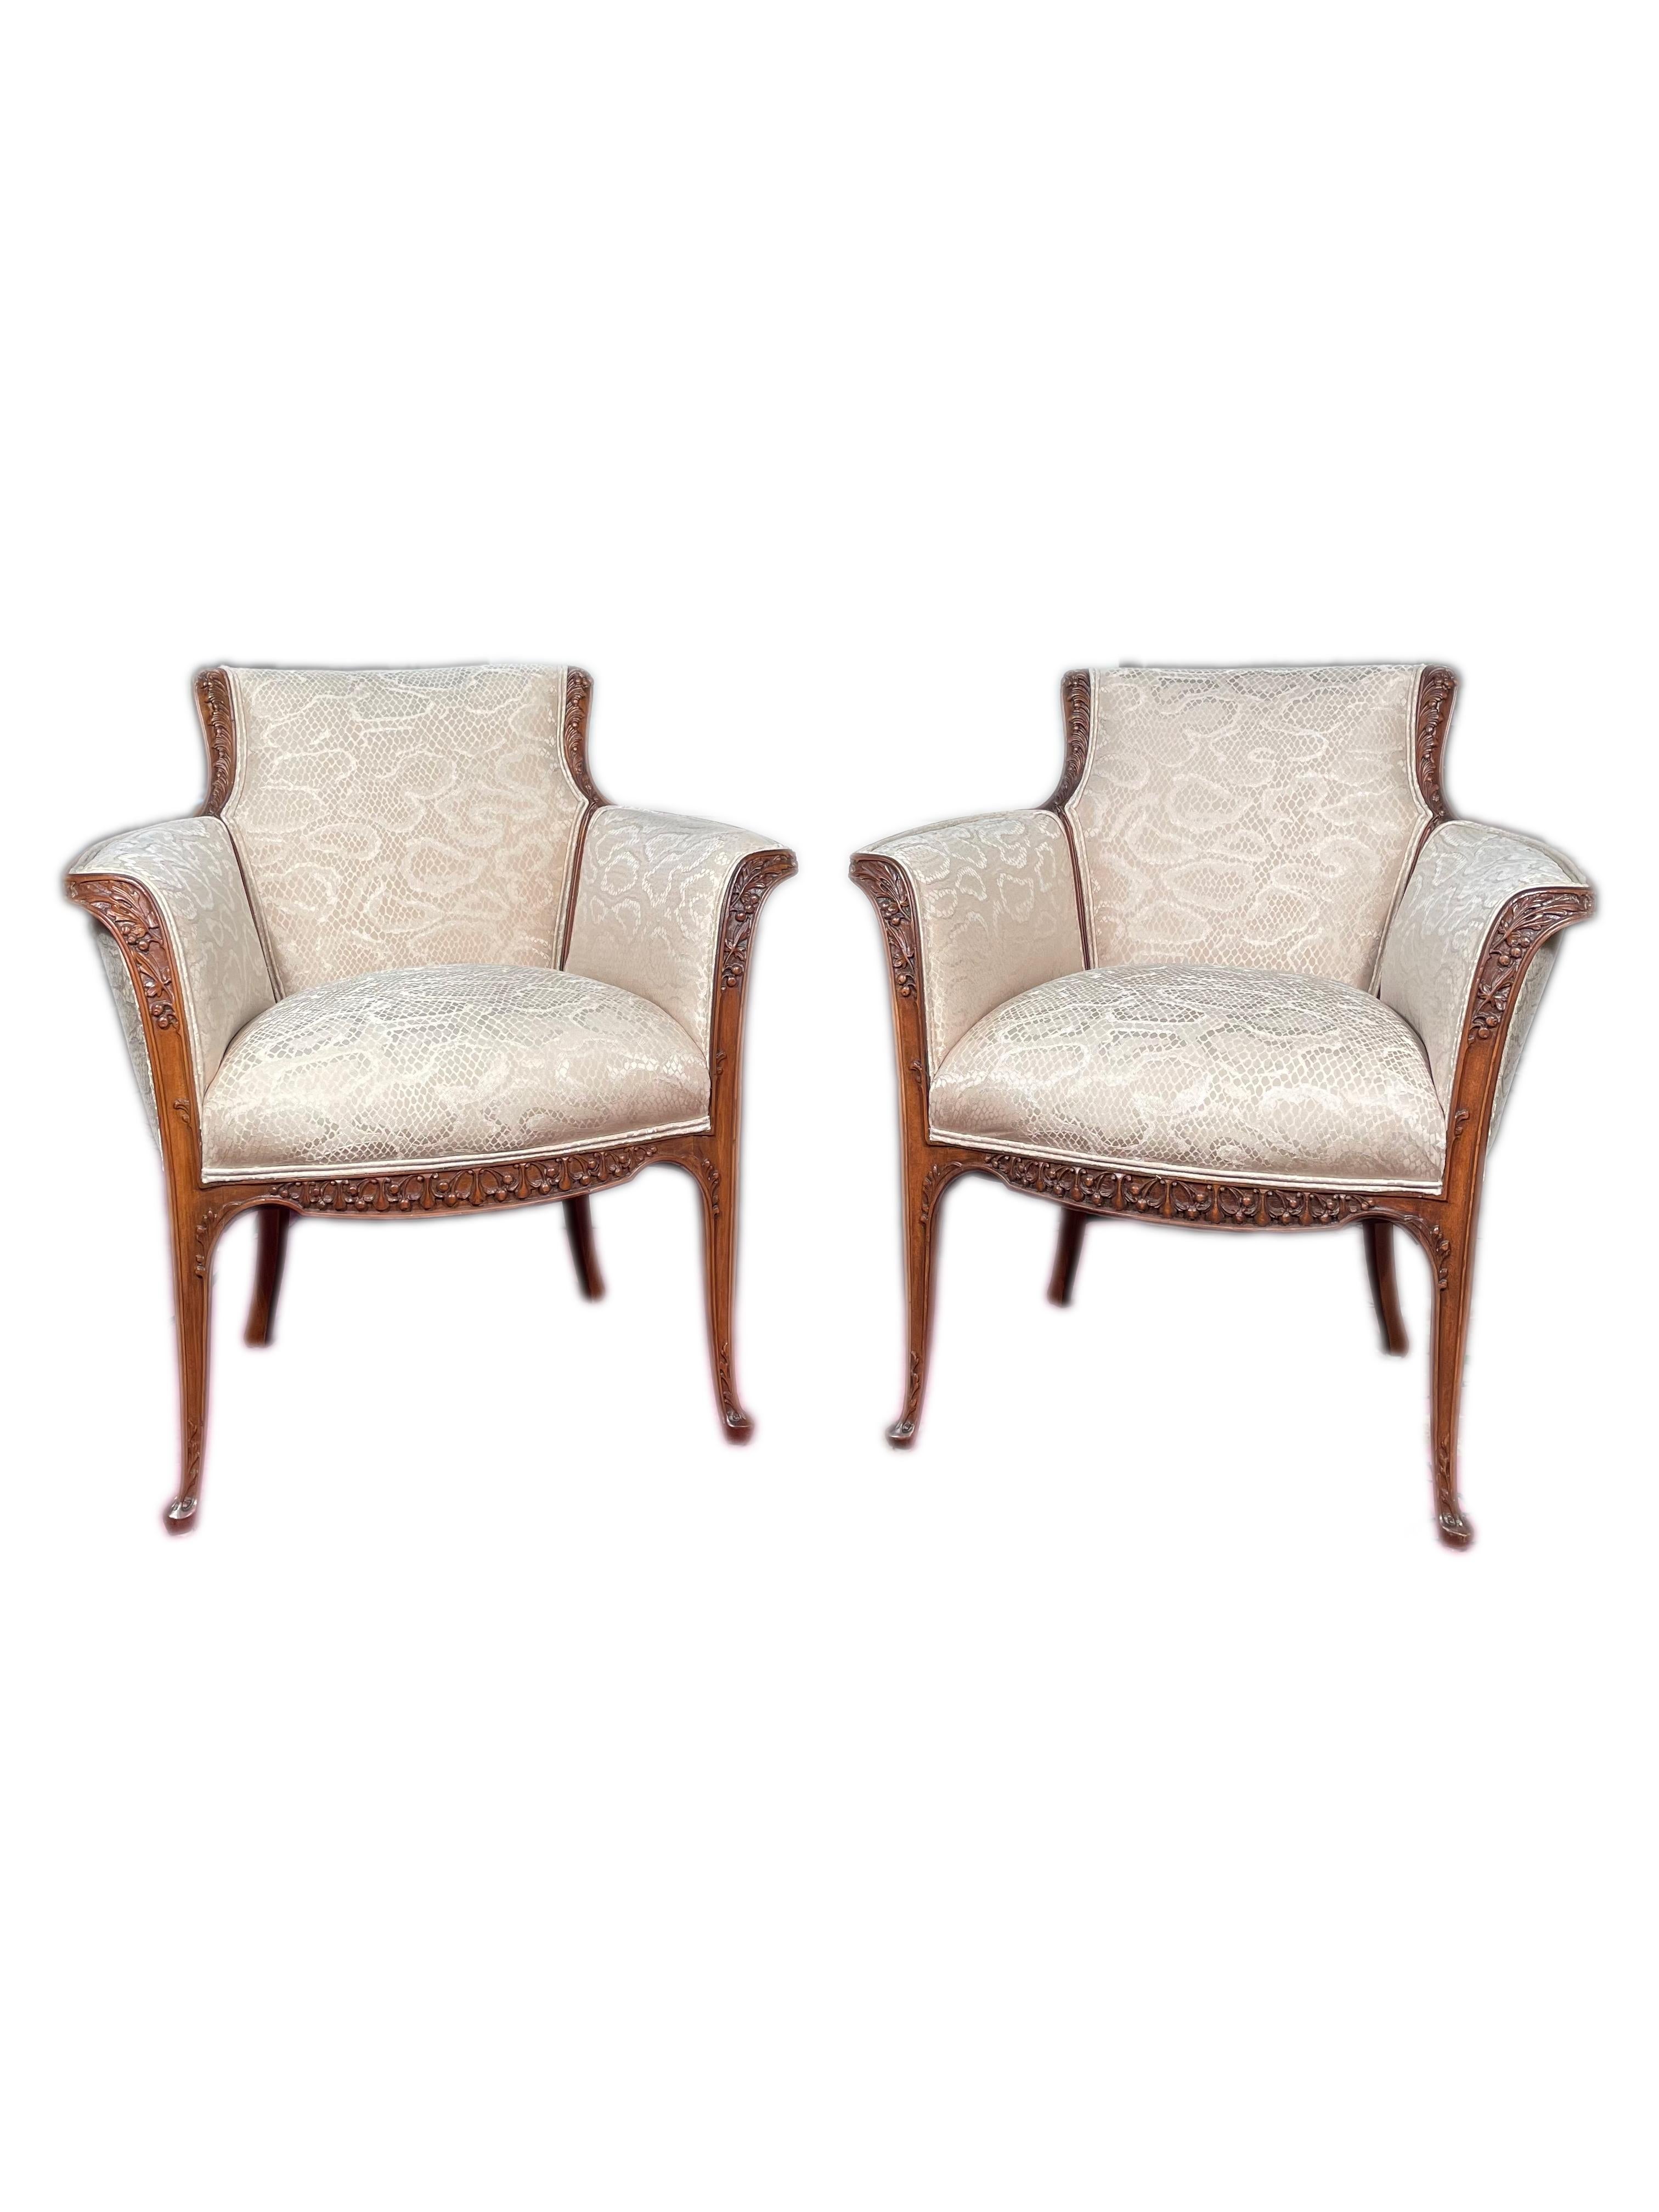 Upholstery Pair of French Art Nouveau Armchairs by, Louis Majorelle Arm Chairs  For Sale